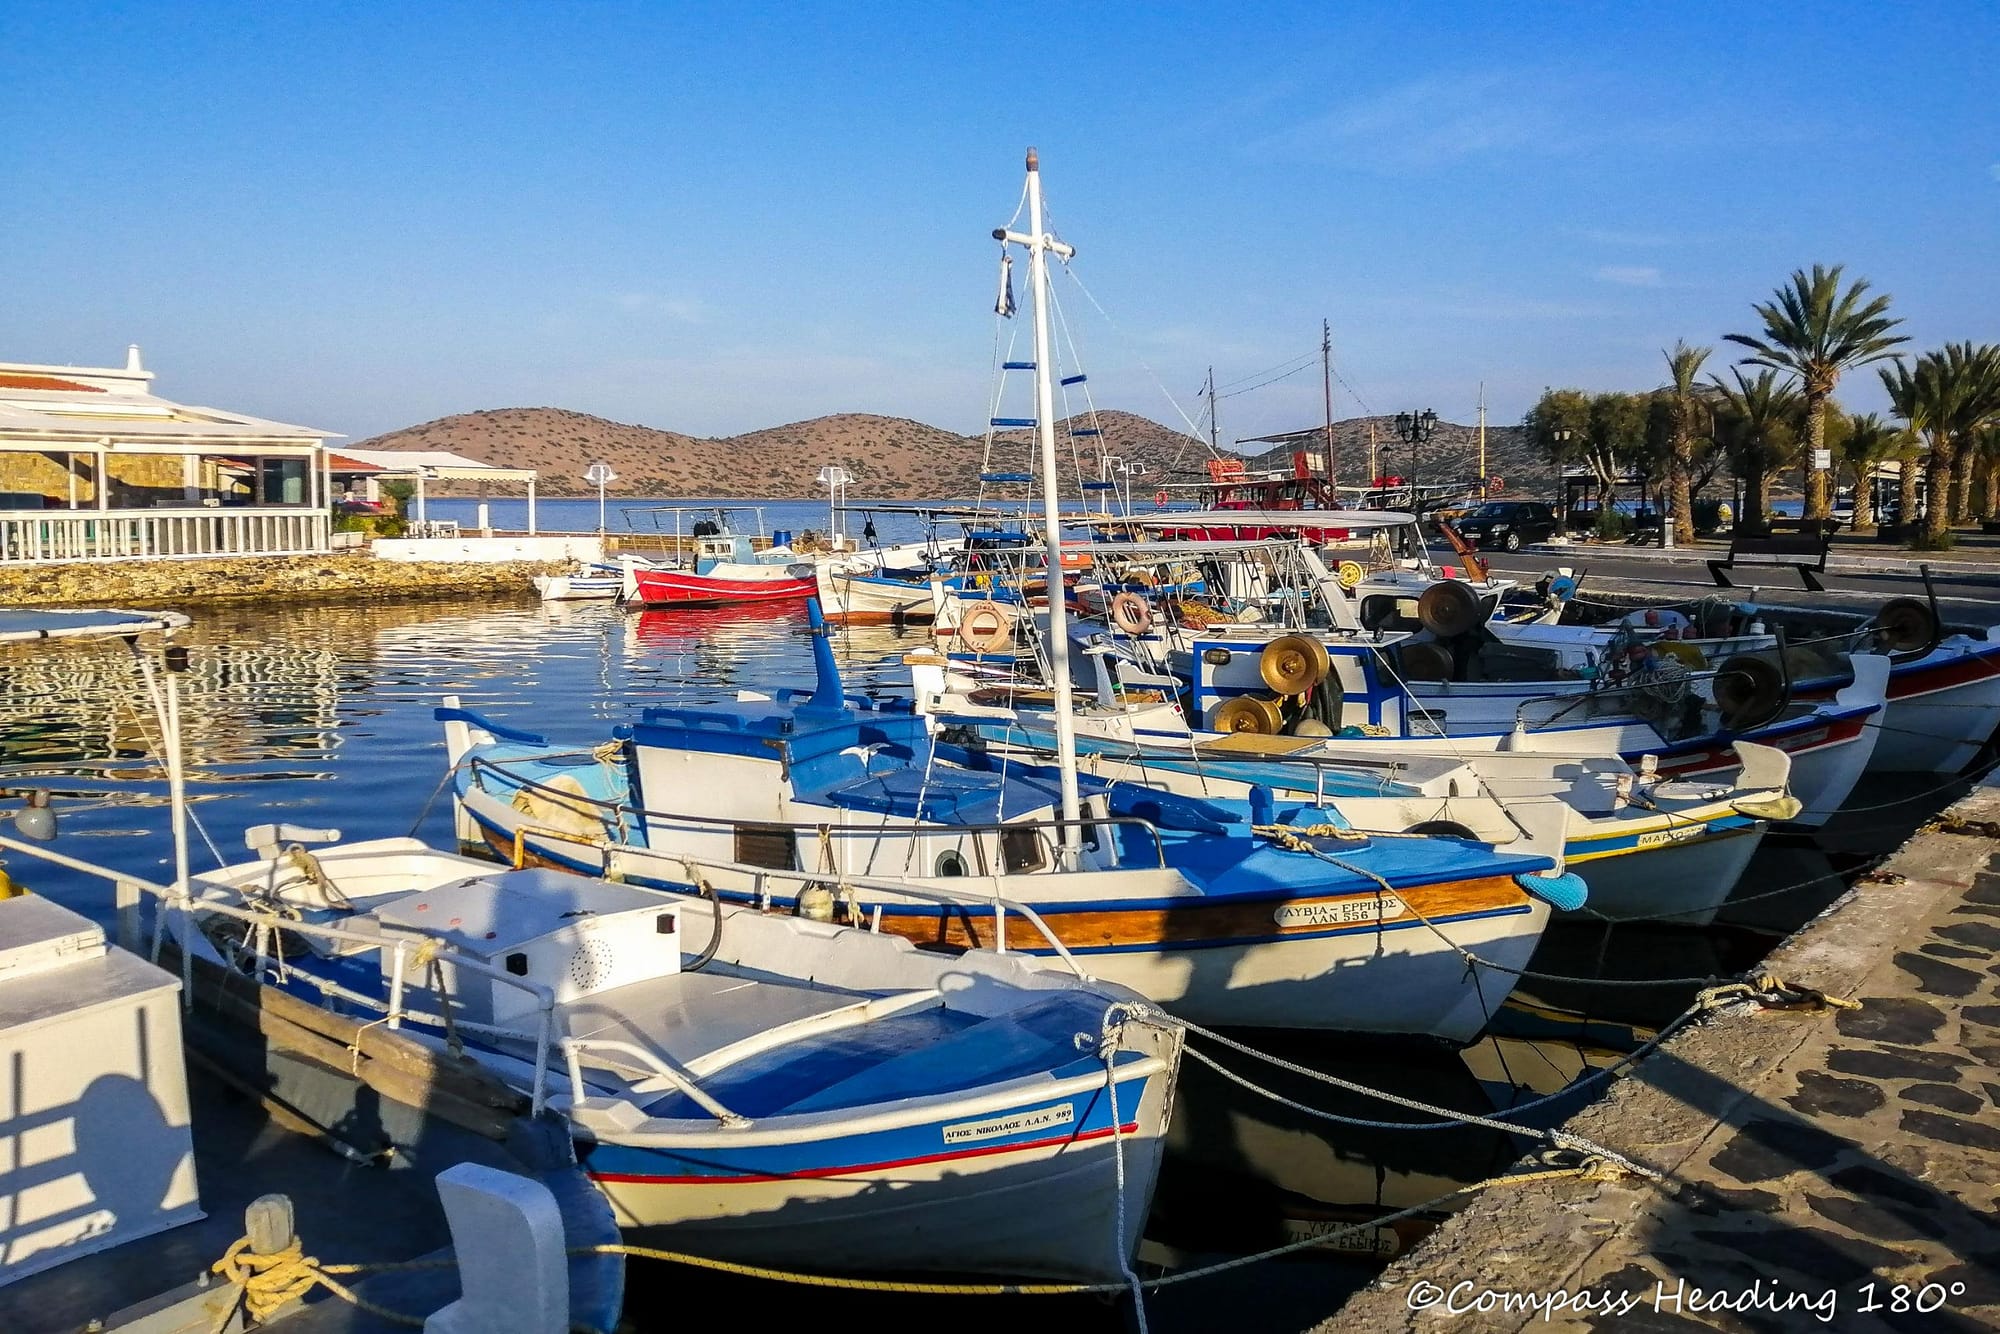 Elounda fishing harbour is full of colourful boats.